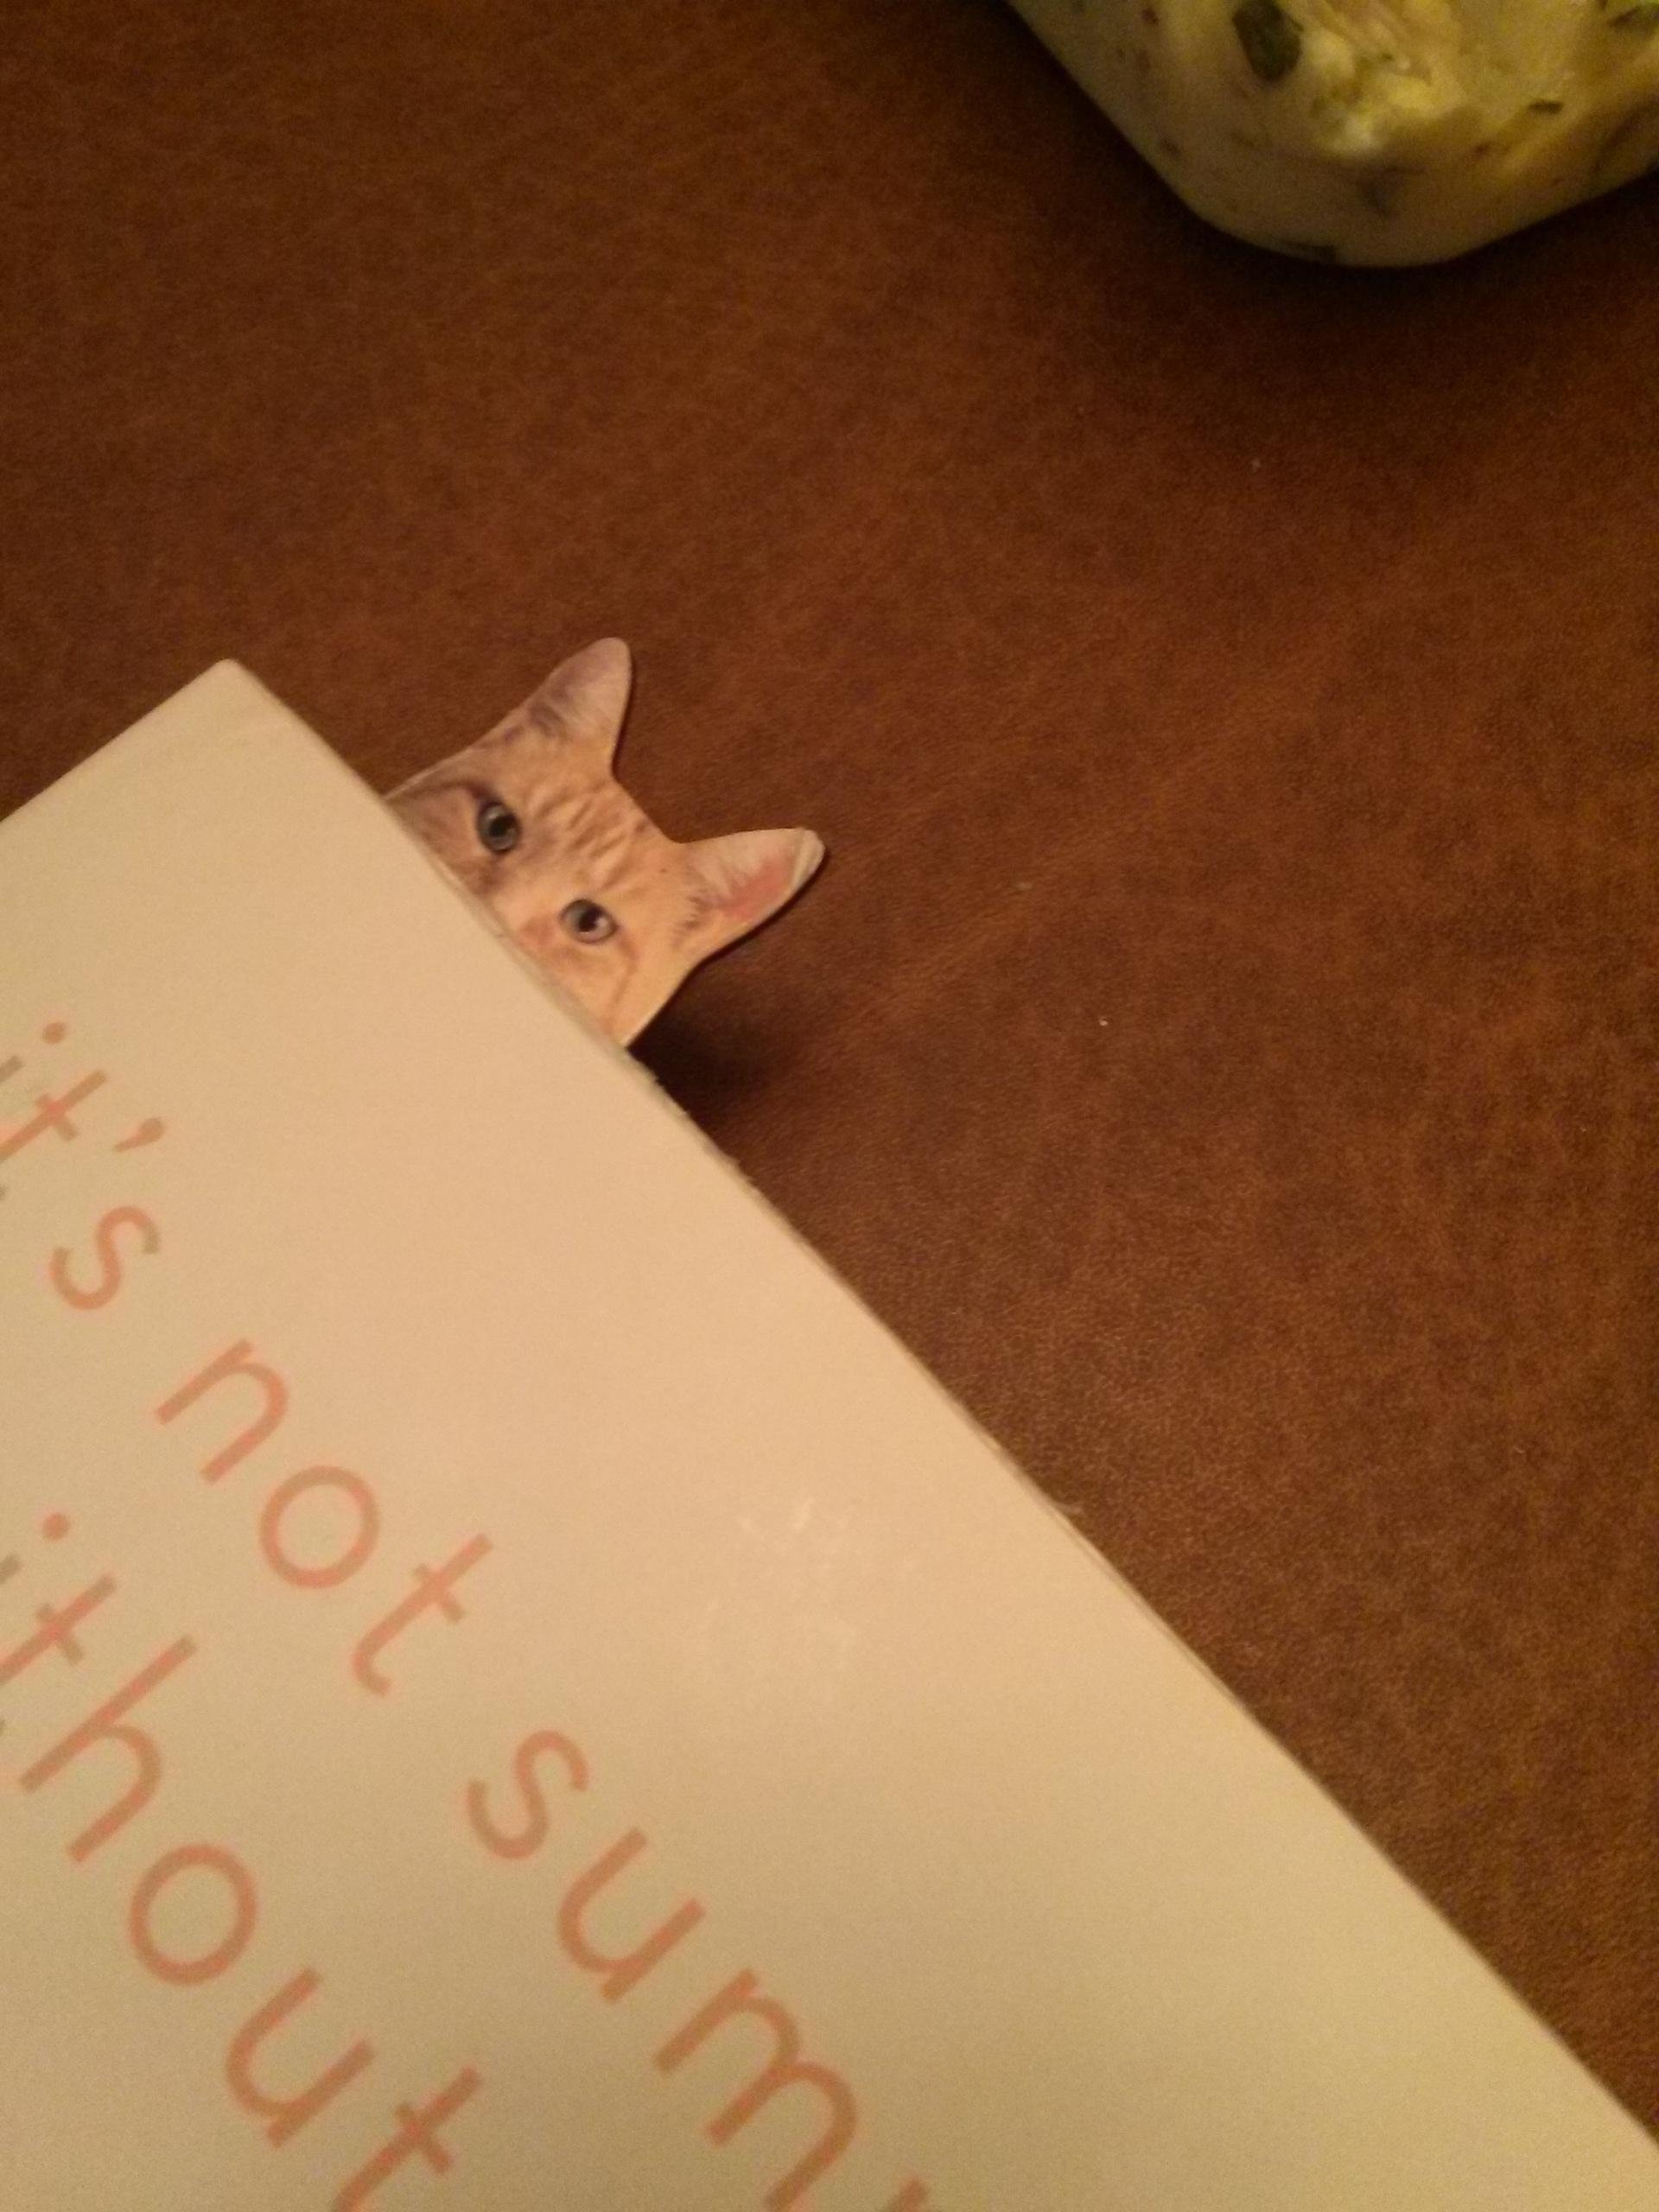 My girlfriend thinks her bookmark is hilarious.